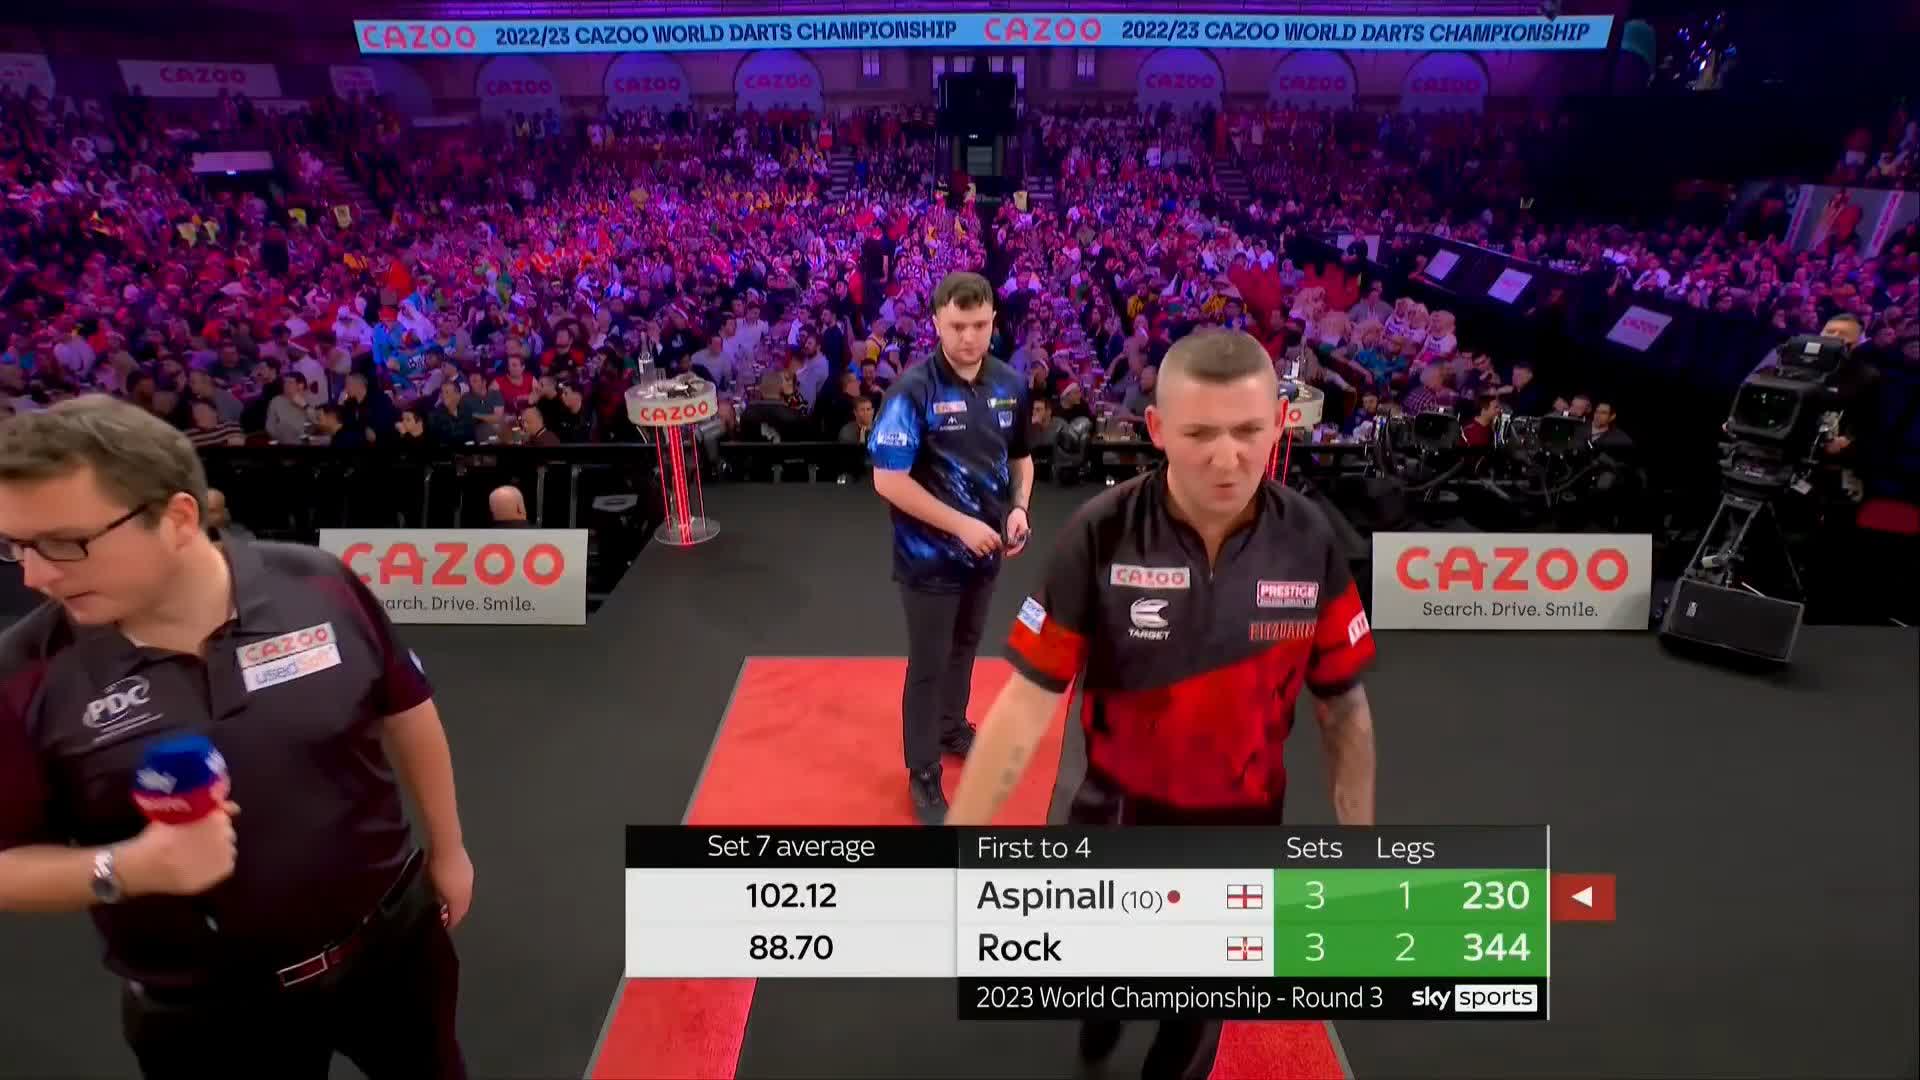 PDC Darts on Twitter: "ROCKY WINS A THRILLER! Believe hype! 🤩 Josh Rock hits THIRTEEN 180s on his way to deciding set victory over Aspinall! Special, special talent. #